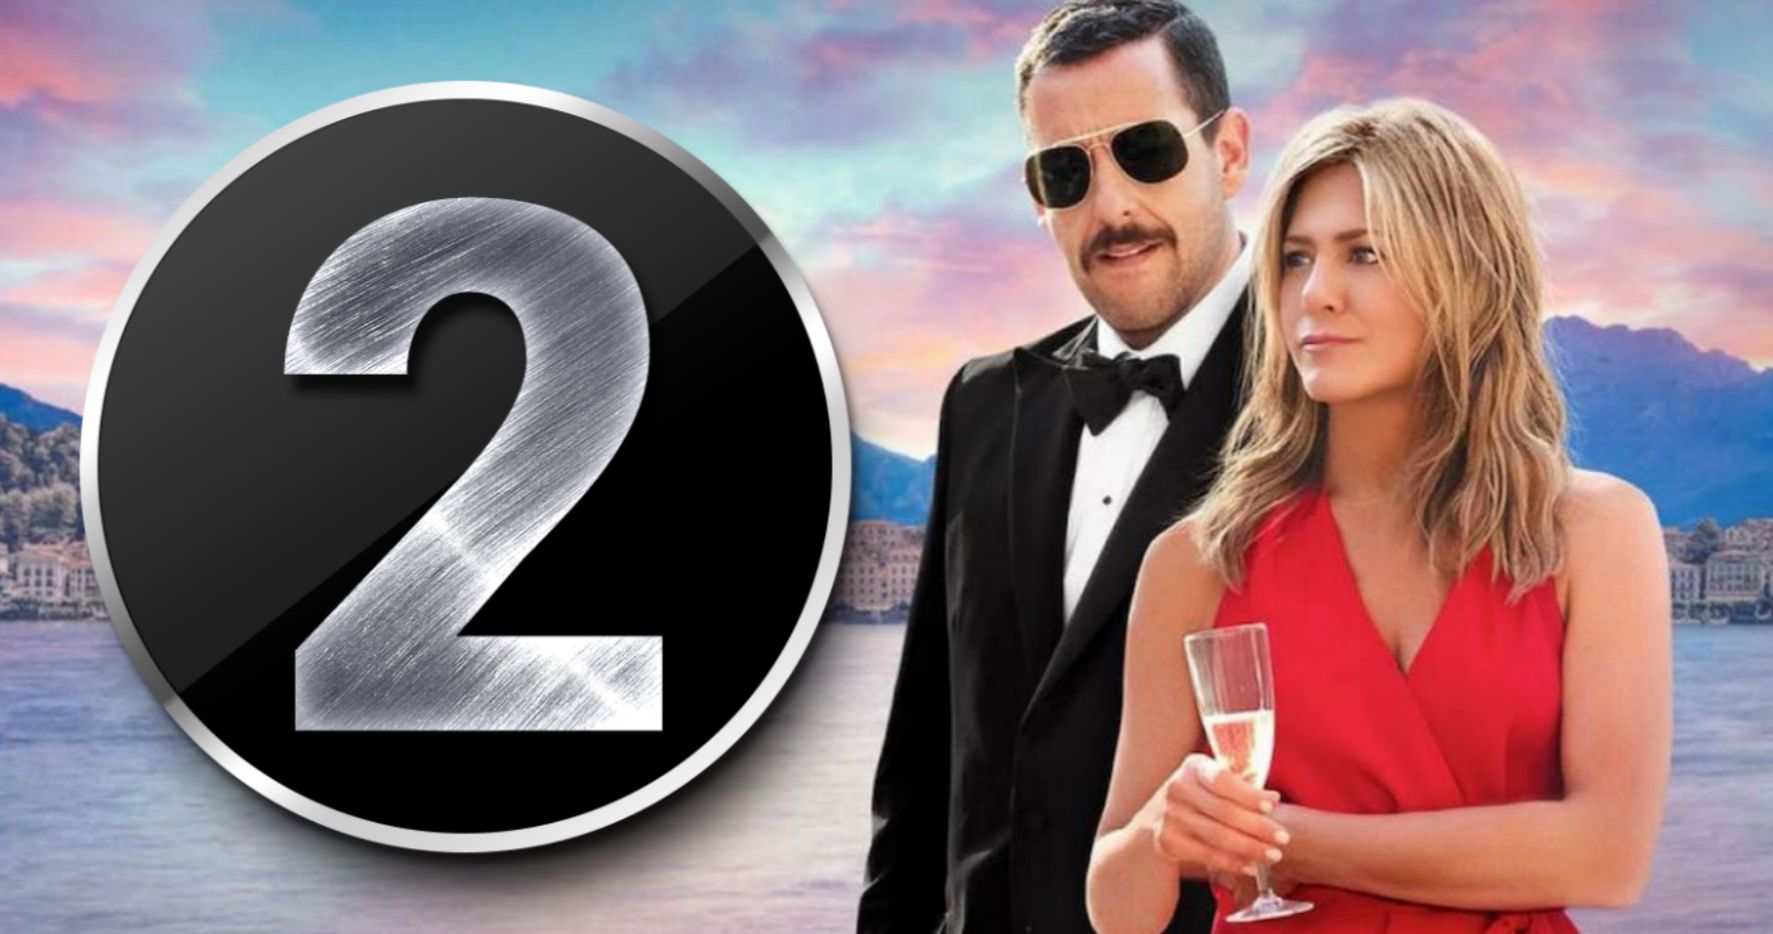 Murder Mystery 2 Happening at Netflix with Sandler &amp; Aniston Expected to Return